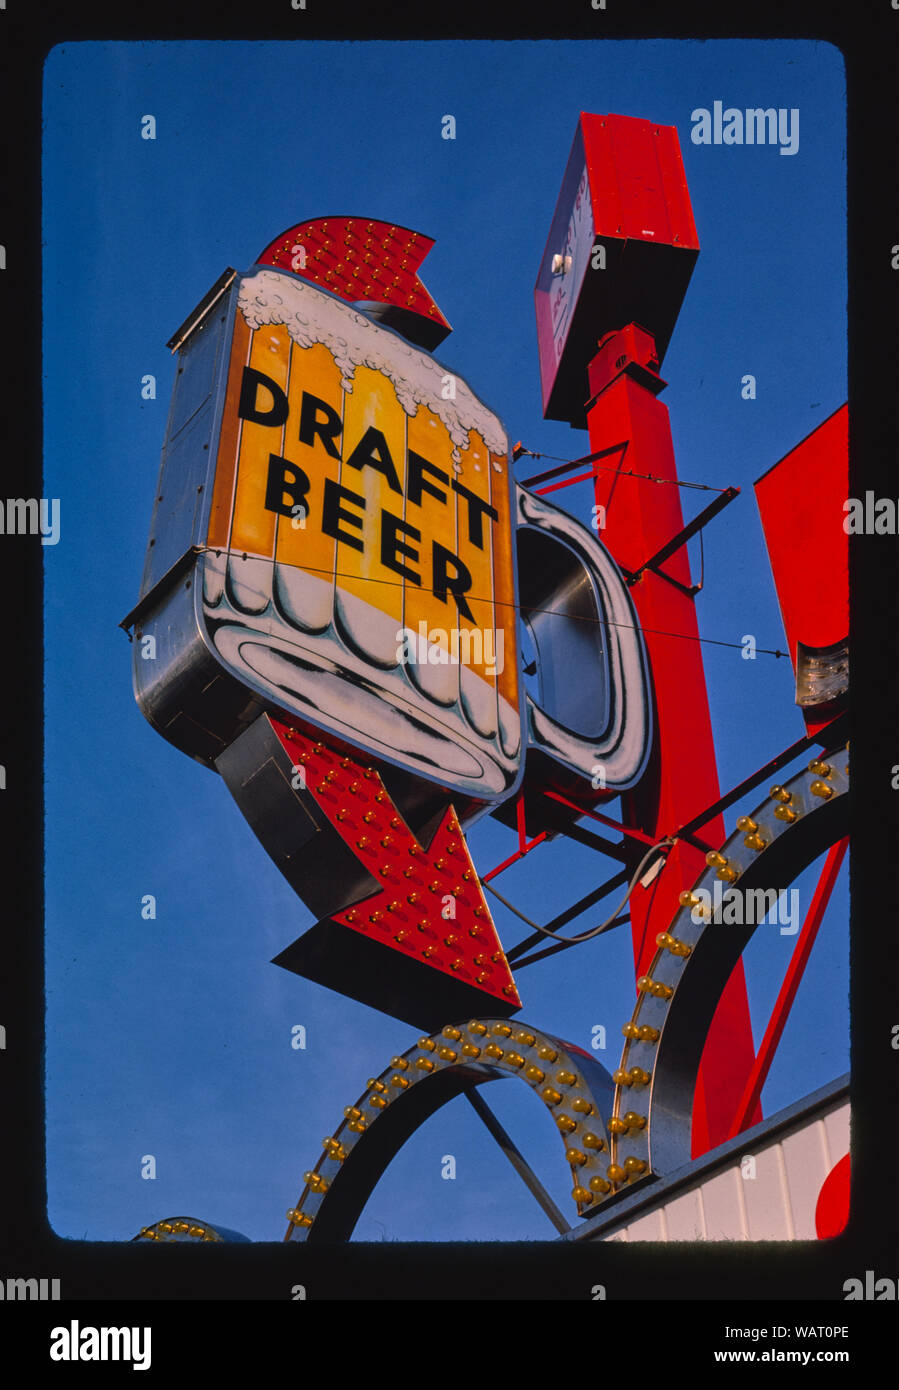 Draft beer sign, Seaside Heights, New Jersey Stock Photo